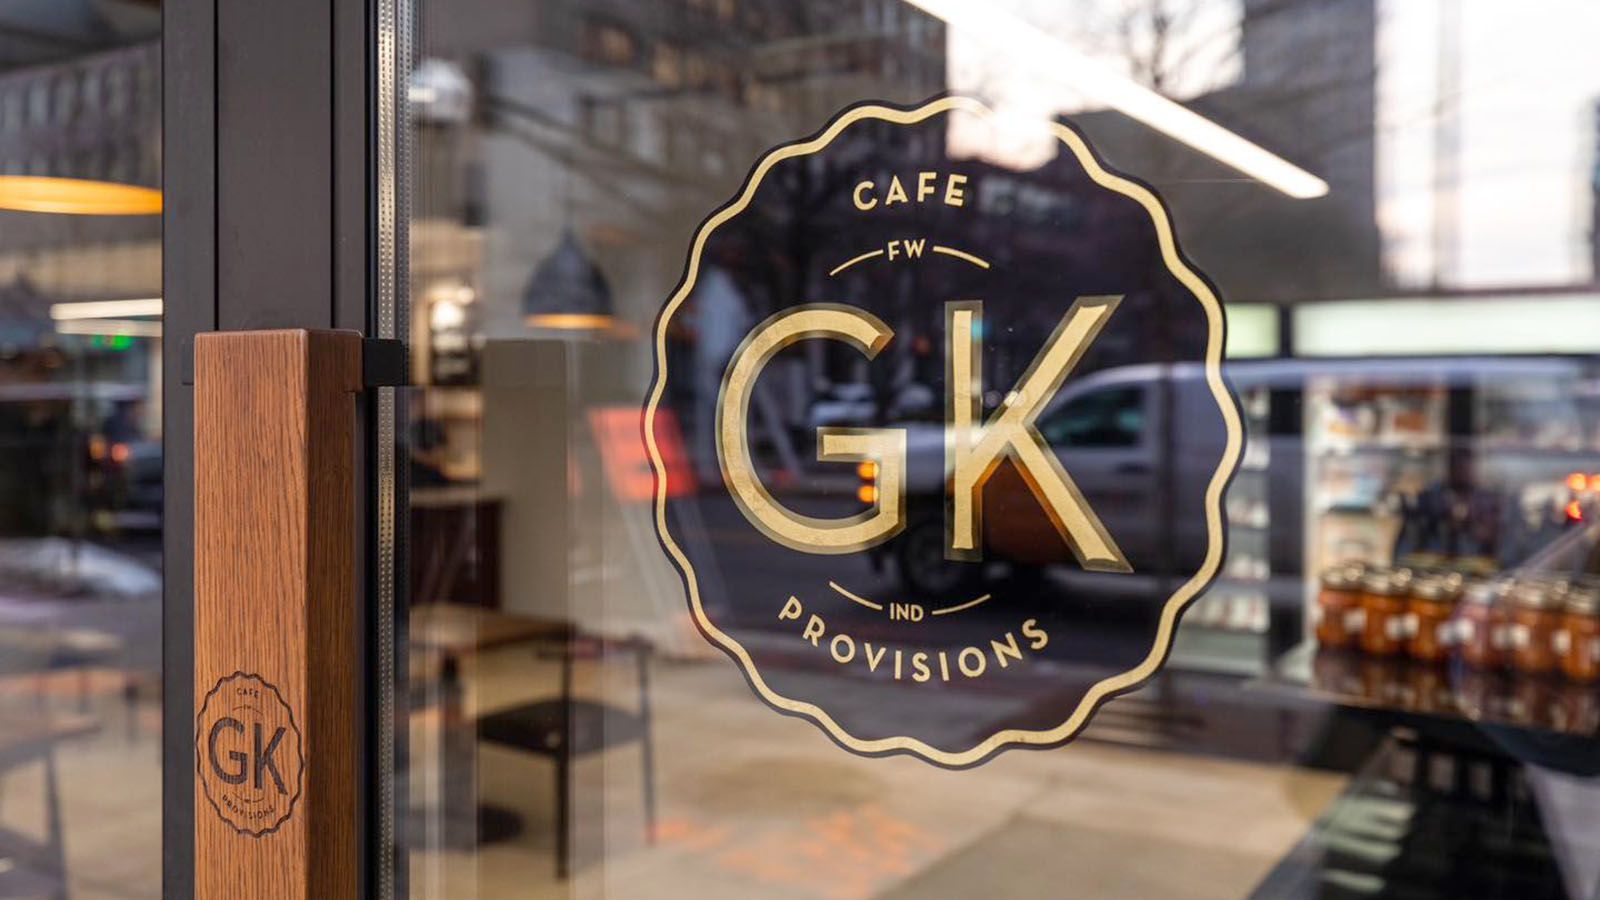 GK Cafe & Provisions opened downtown on Friday, Feb. 10.